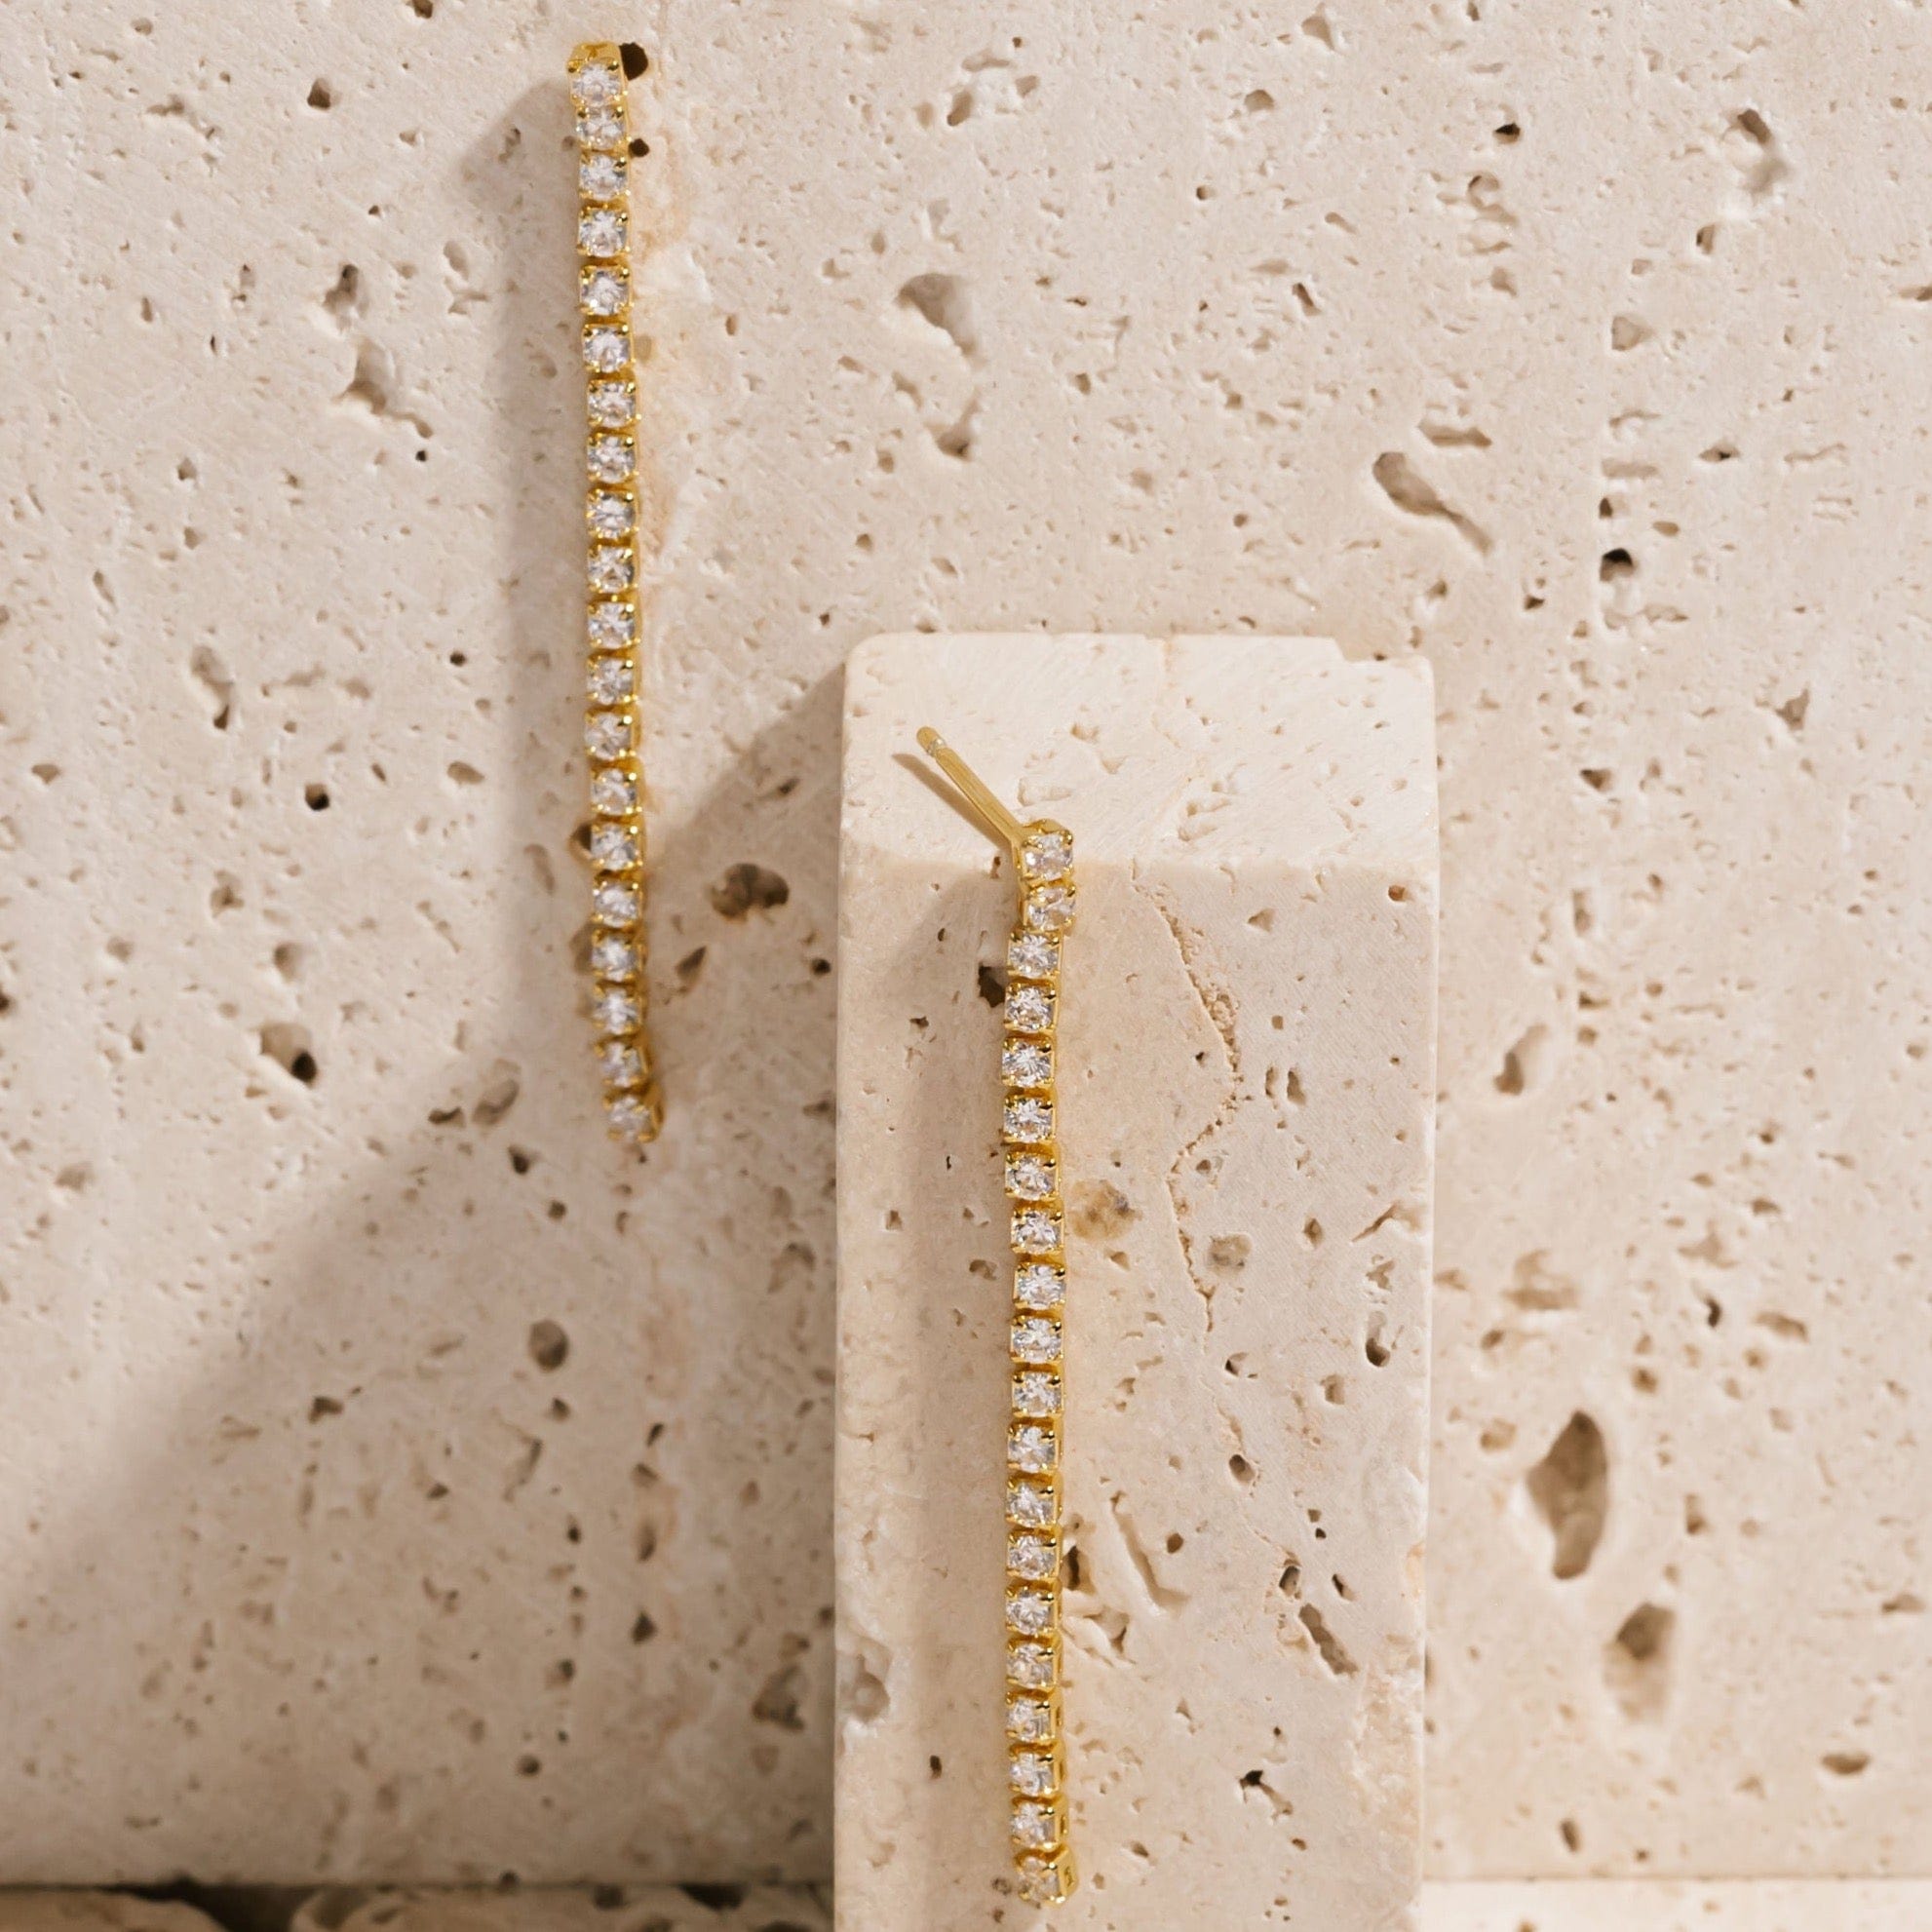 A Scintilla Dangle Hoop earring hangs from the side of a porous stone slab while a second earring cascades down a smaller stone block. 